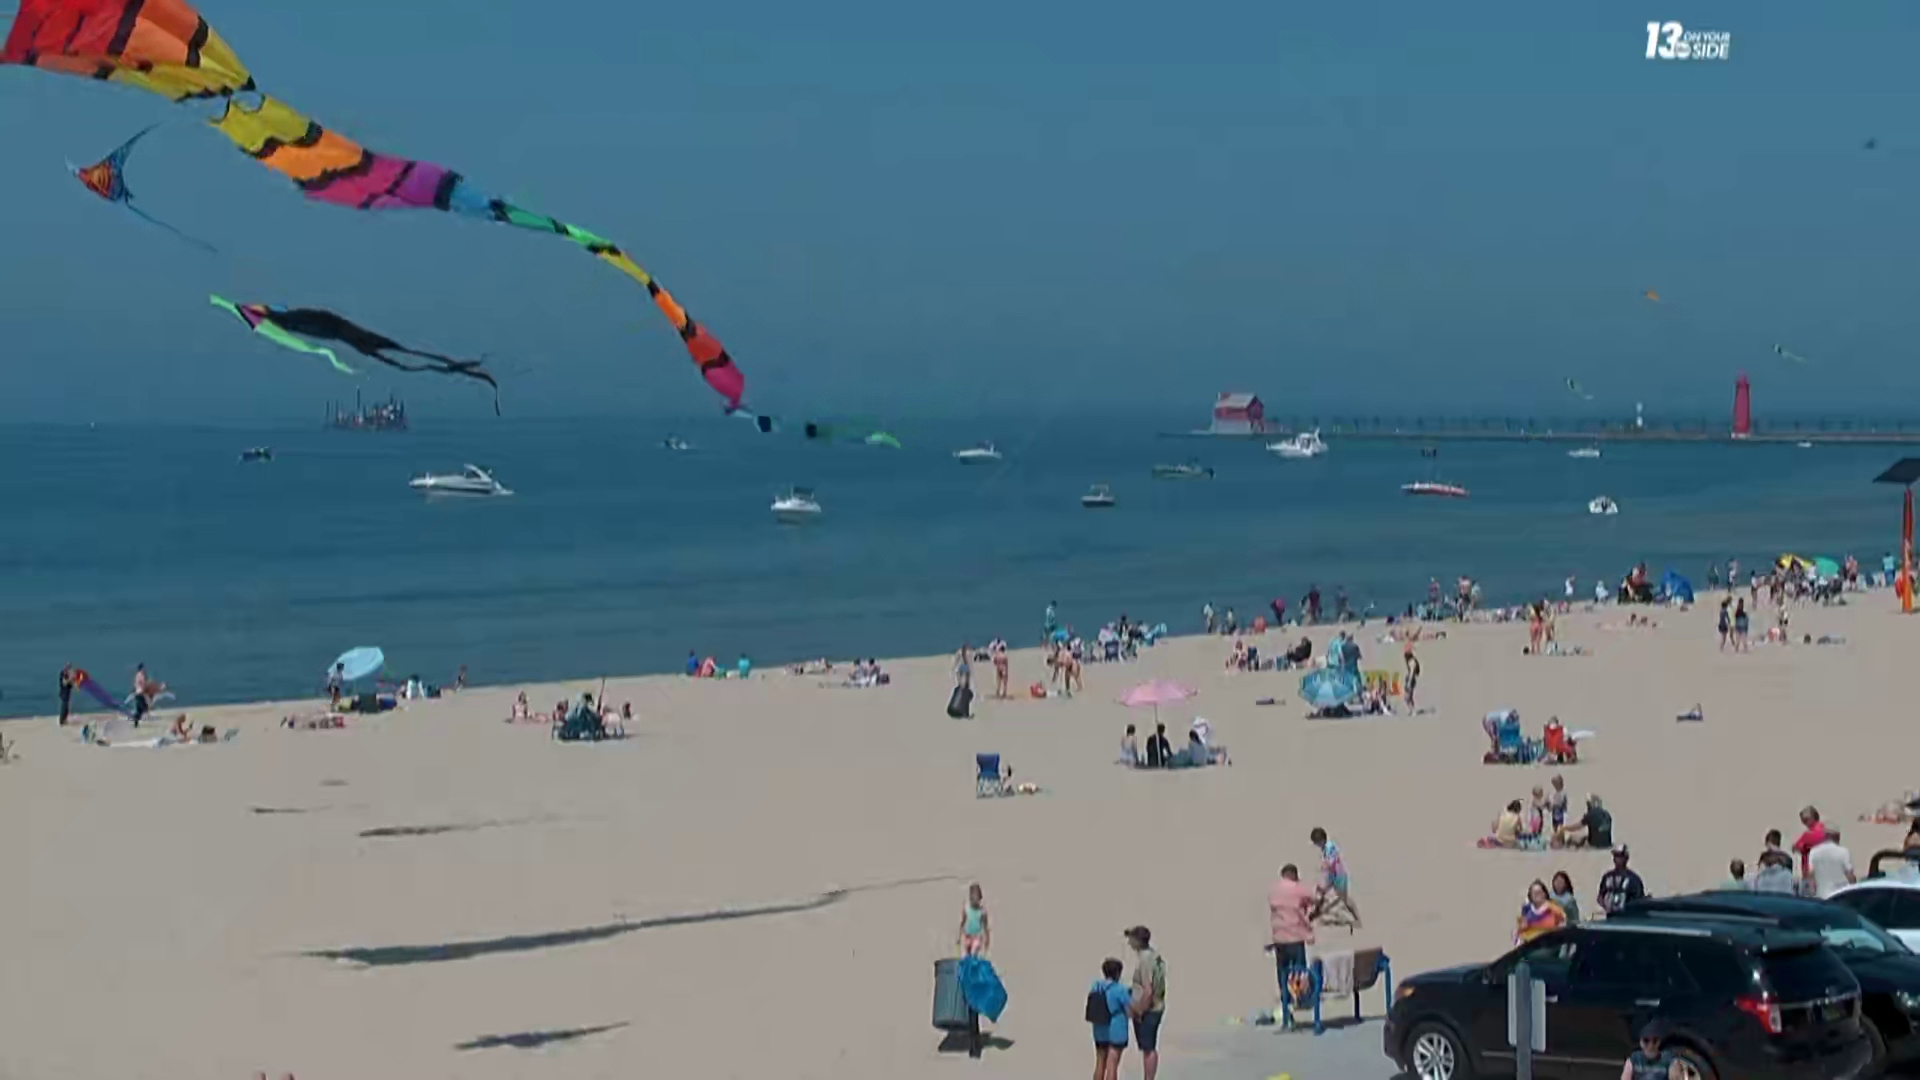 The kite festival runs Saturday from 10 a.m. to 5 p.m., and then again on Sunday from 11 a.m. to 5 p.m.